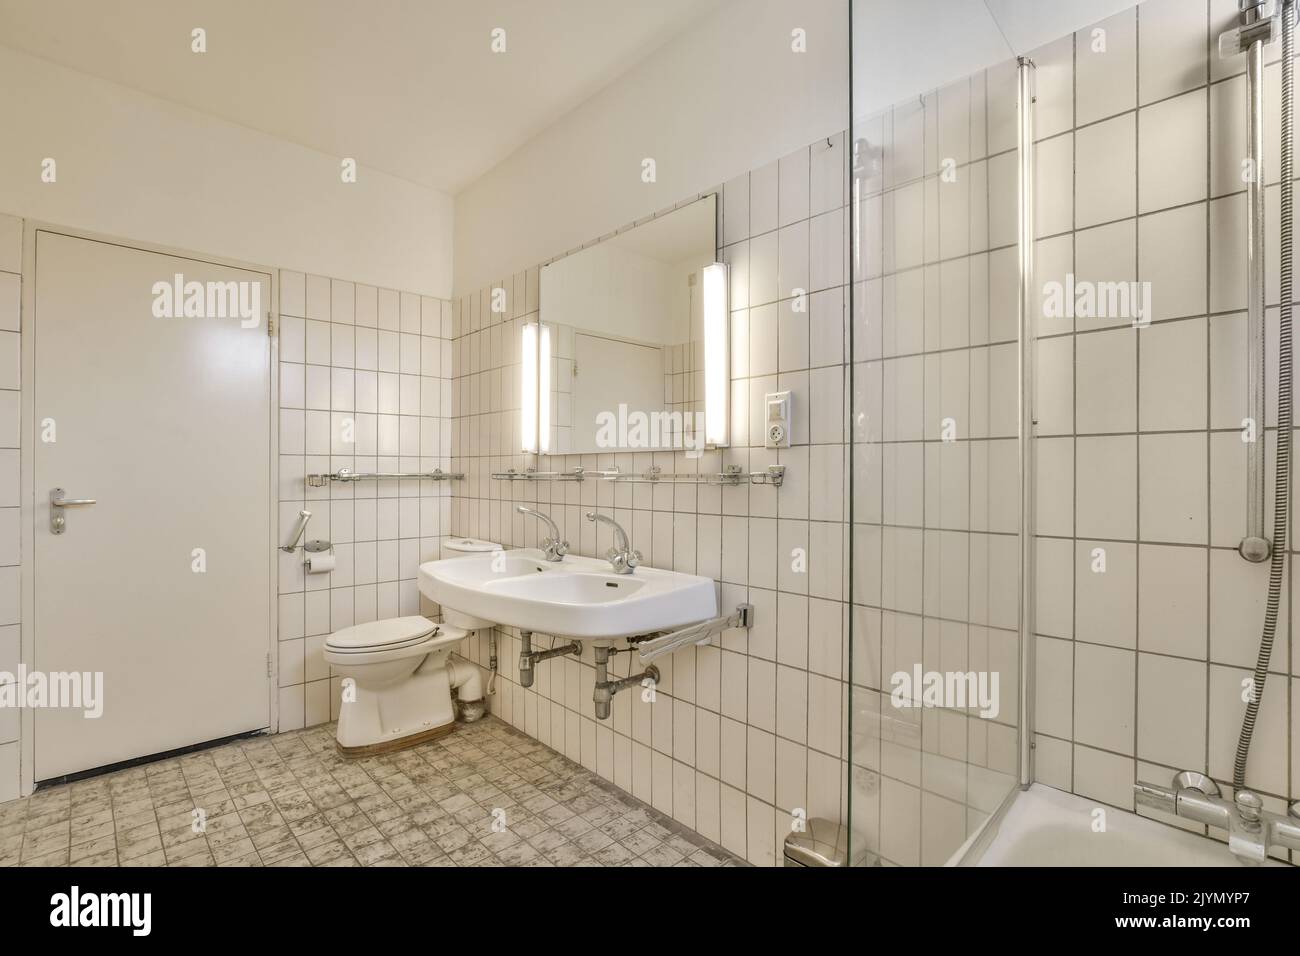 Bathroom with white tiled walls near sink in light Stock Photo